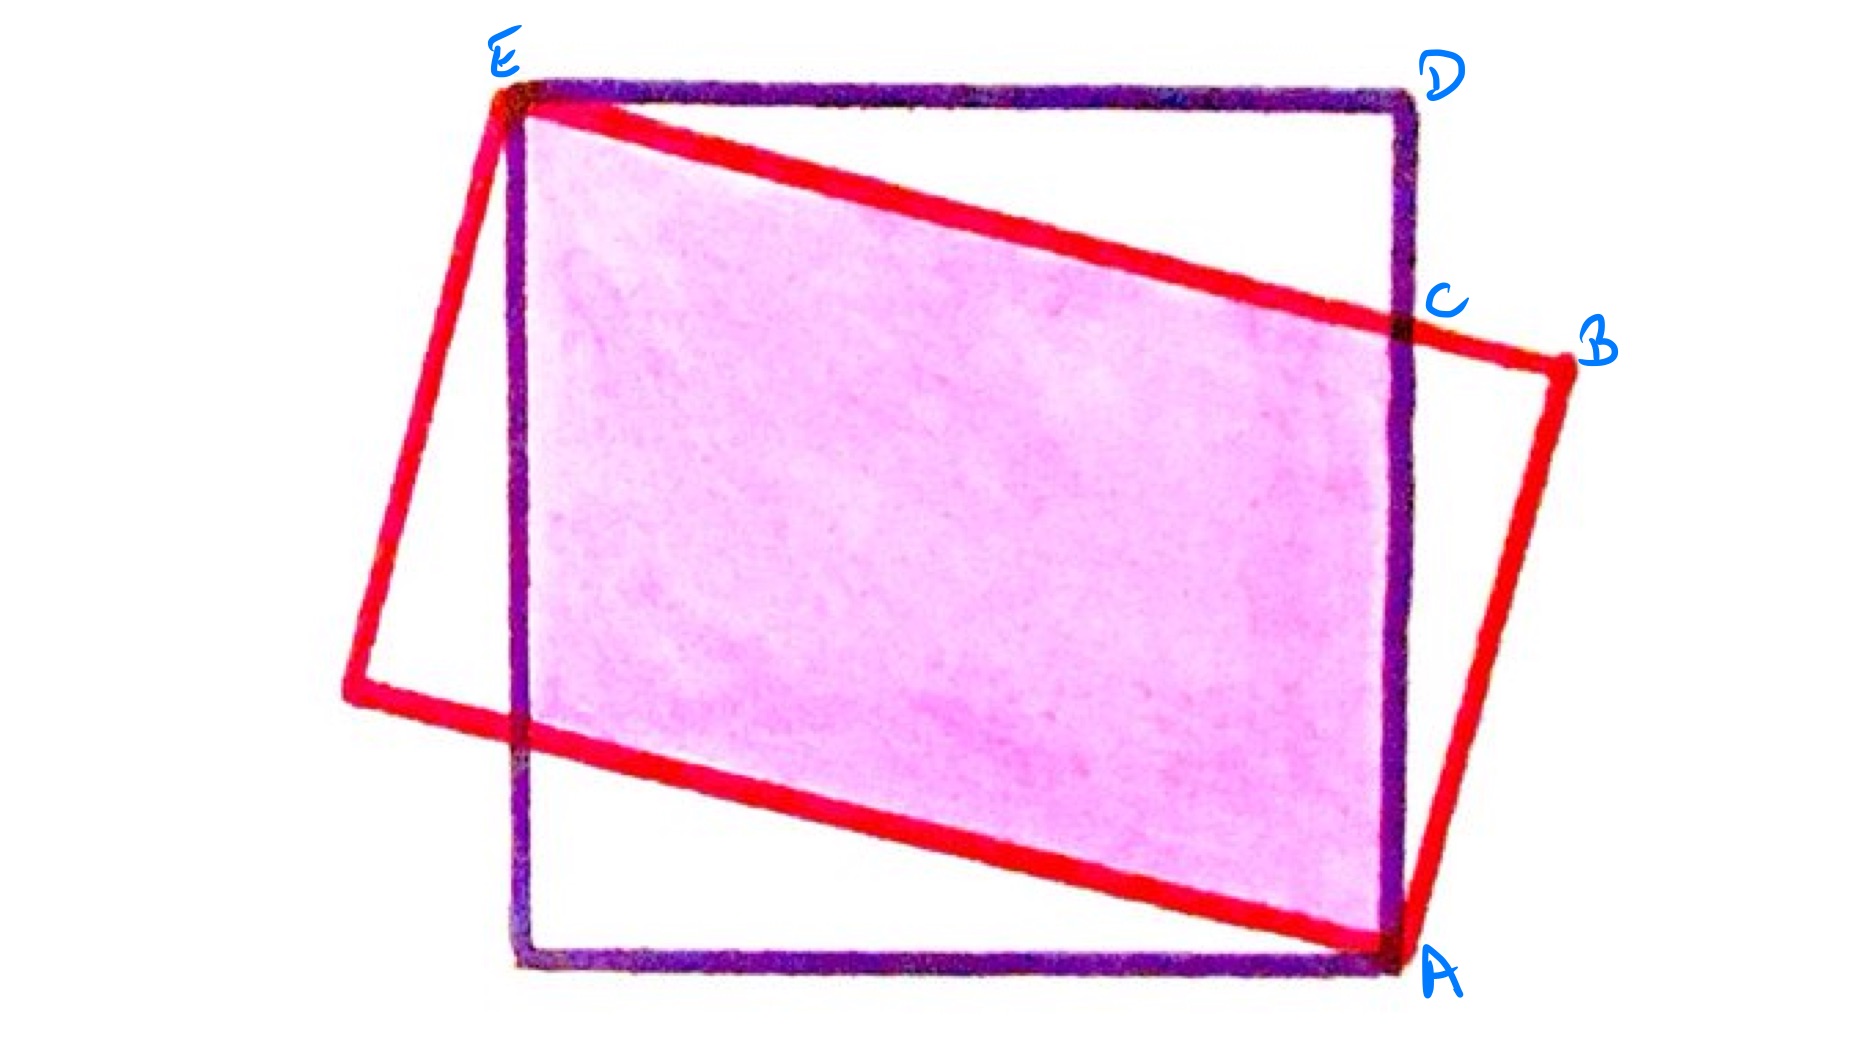 A square and a rectangle overlapping labelled